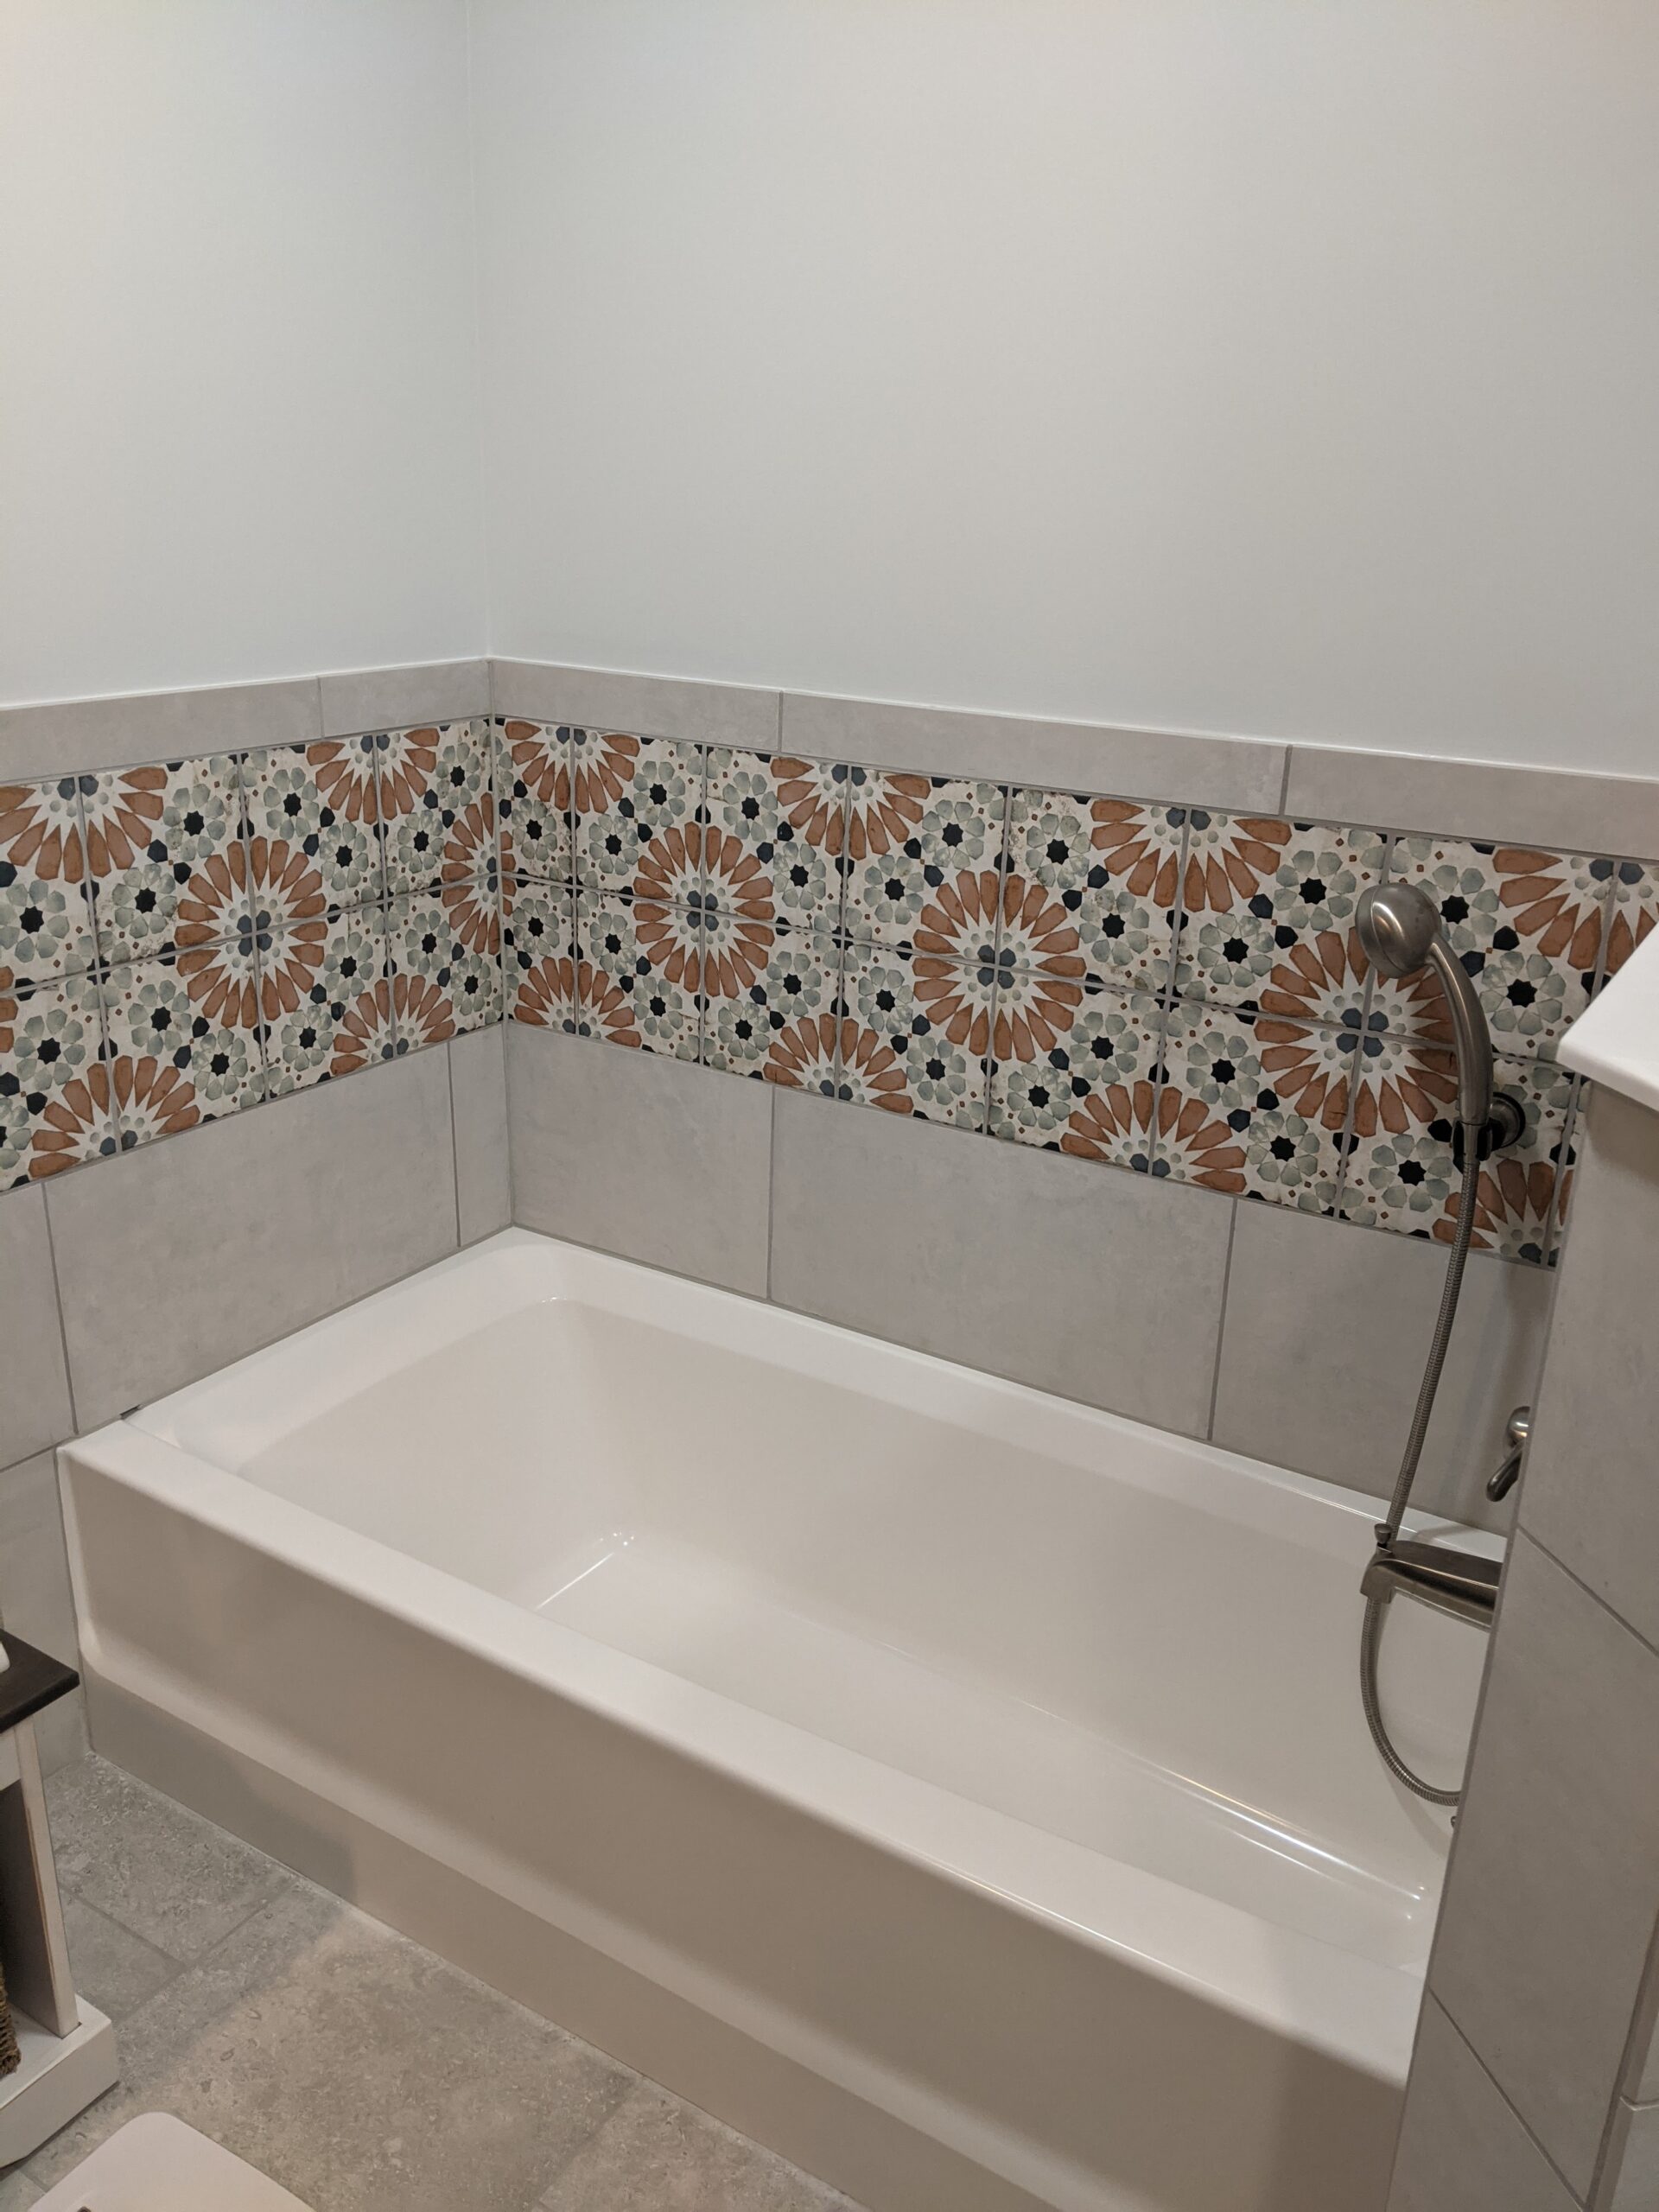 The tub area is now a standard tub with tile and decorative tile surrounding it.